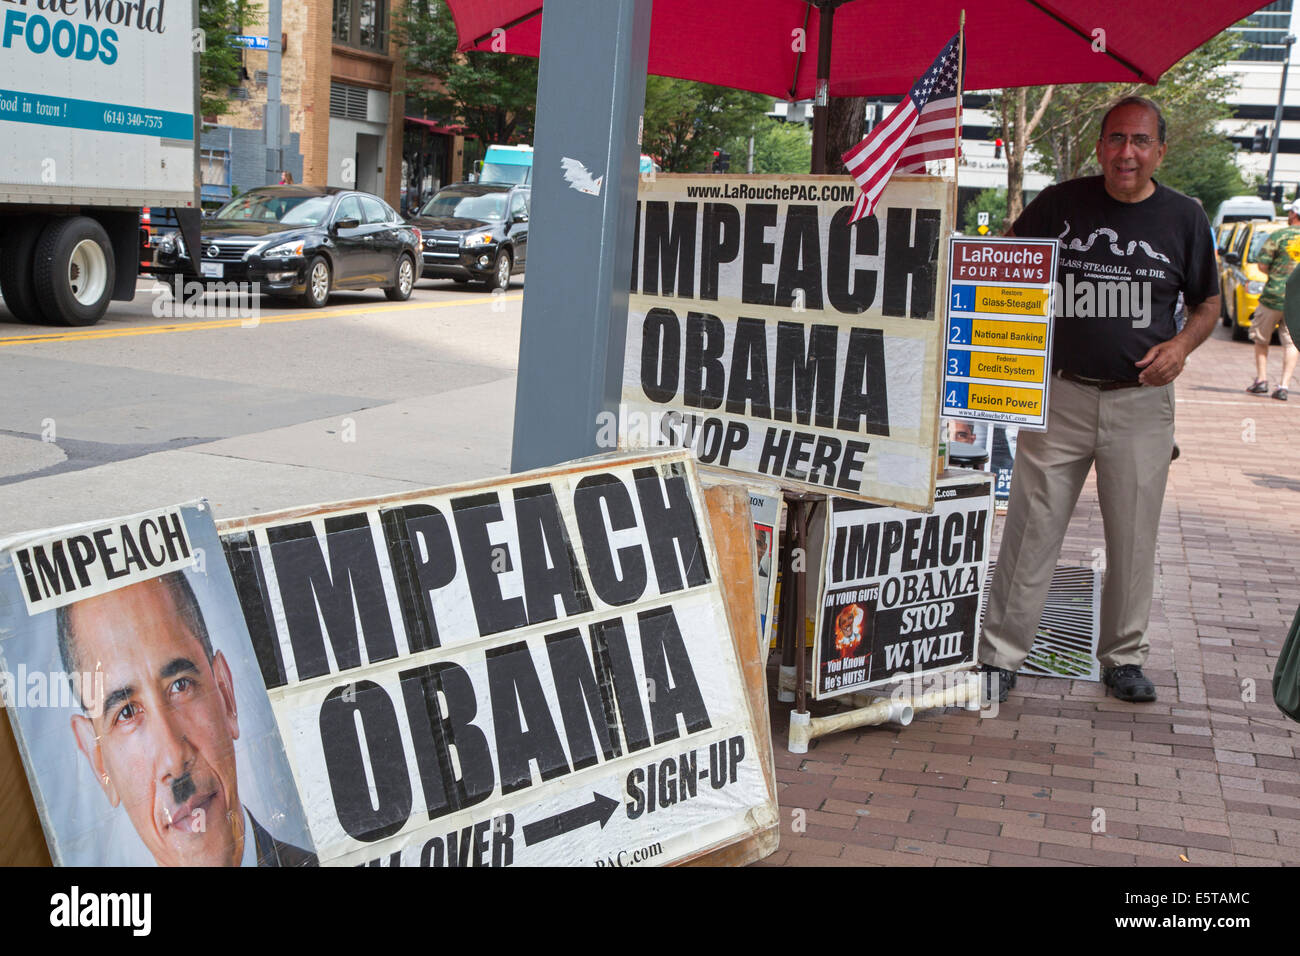 Pittsburgh, Pennsylvania - An activist campaigns to impeach President Obama. Stock Photo